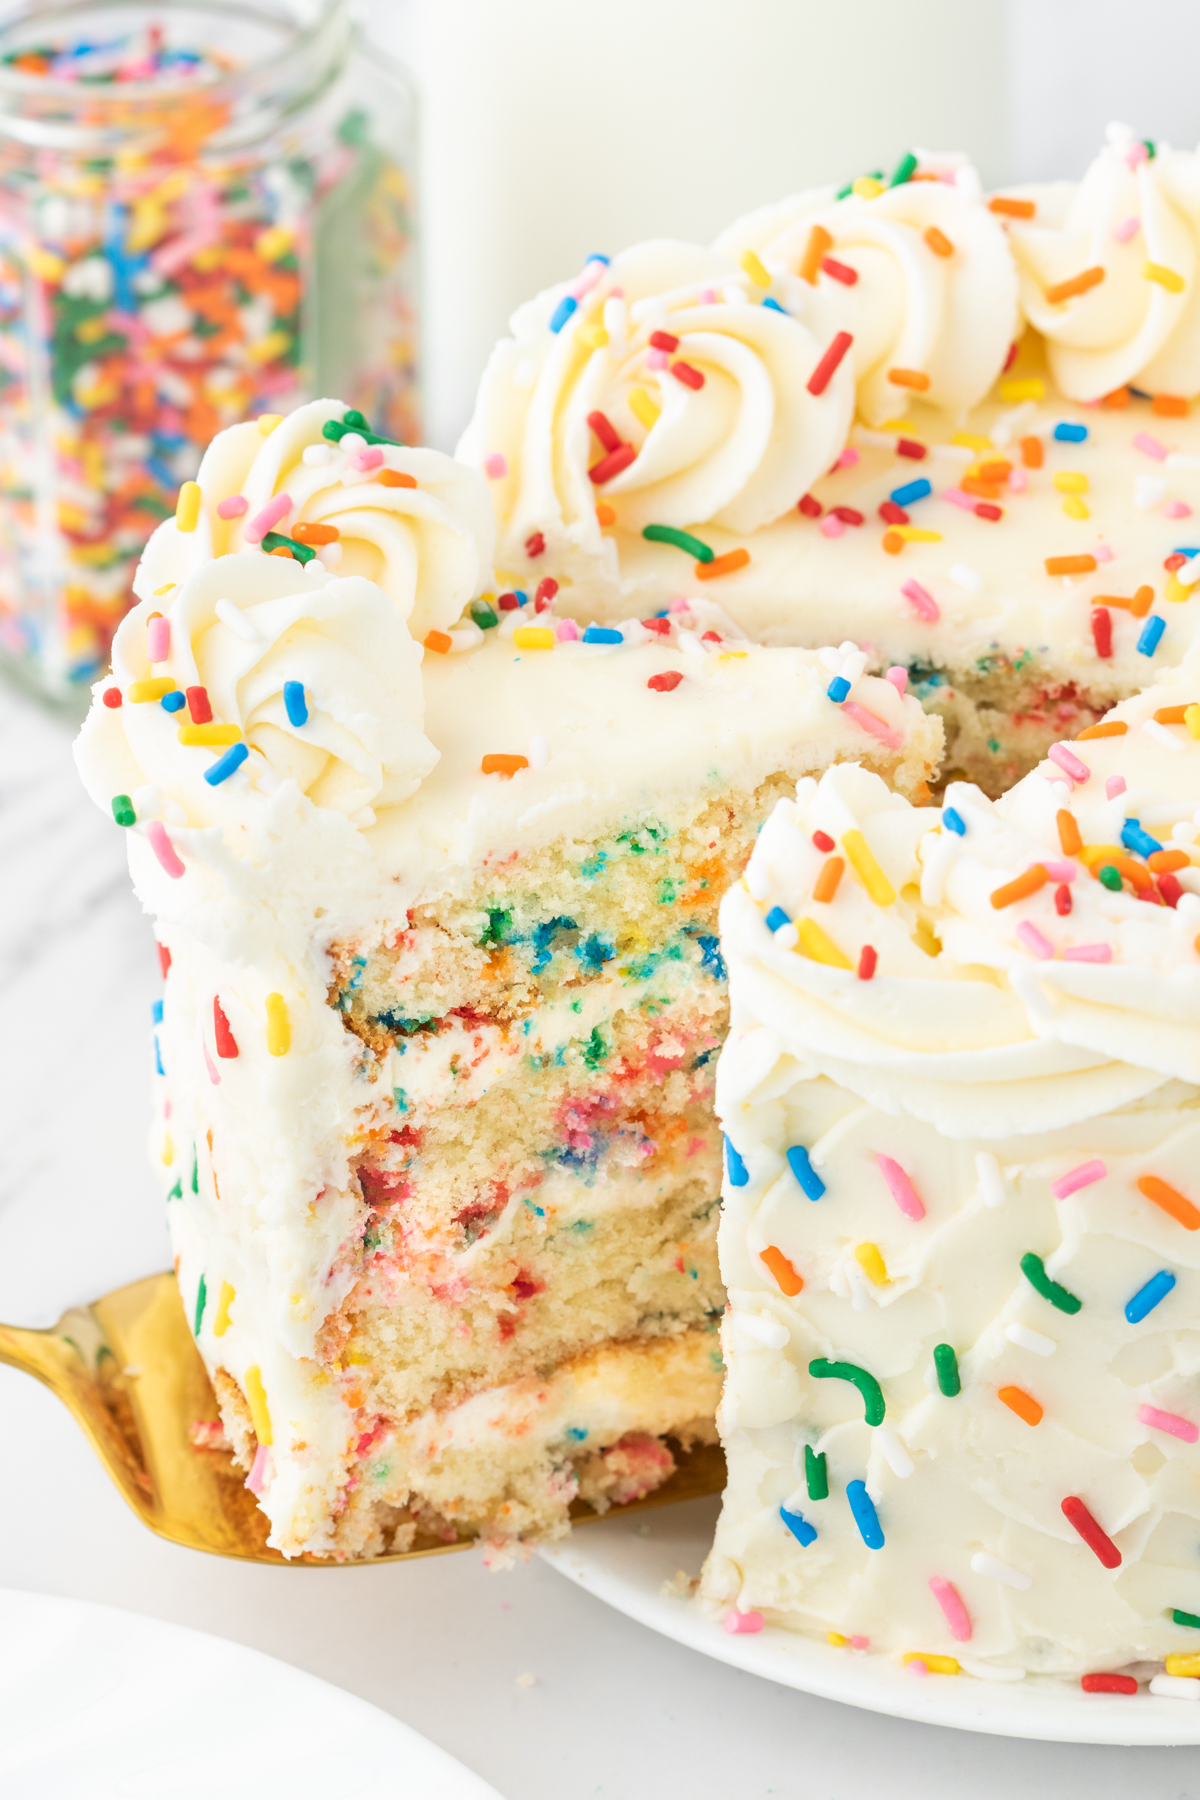 Funfetti Cake is the perfect birthday cake! Layers of moist vanilla cake filled with rainbow sprinkles. It gets filled and frosted with a delicious vanilla buttercream and topped with more sprinkles. 